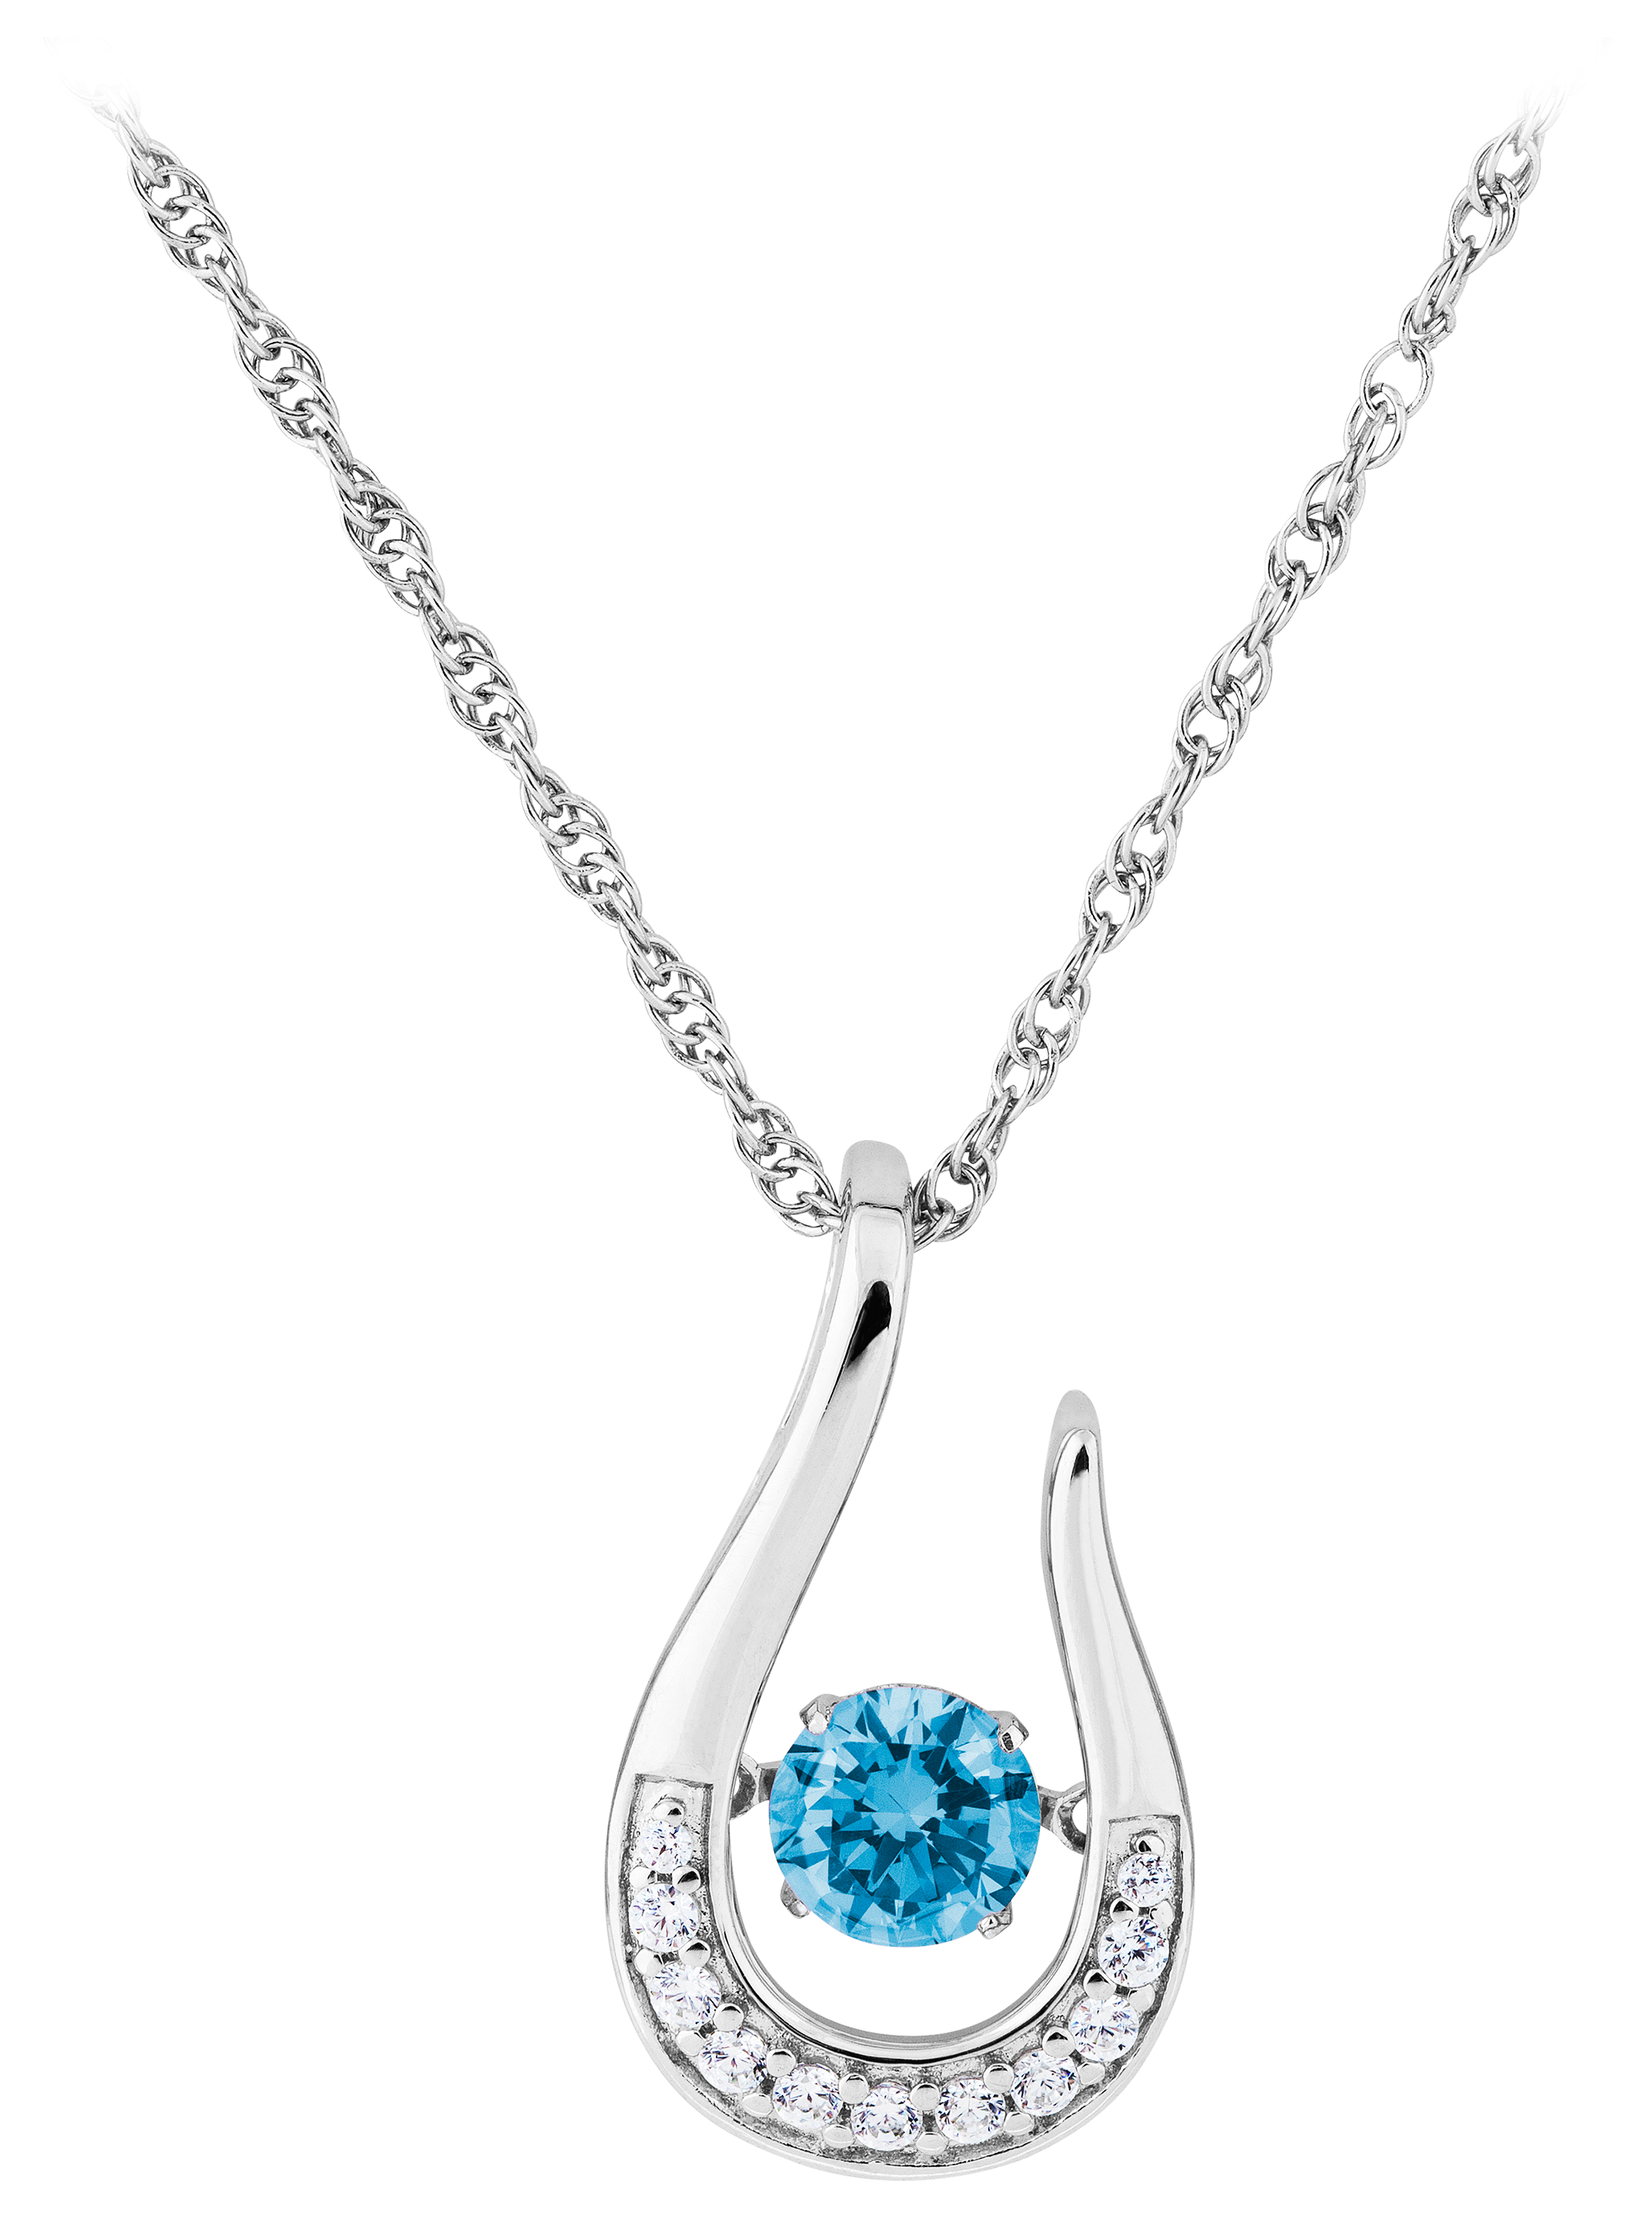 TR Jewelry Concepts Silver Elegance Twinkle Birthstone Pendant Sterling Silver Necklace - Blue Spinel